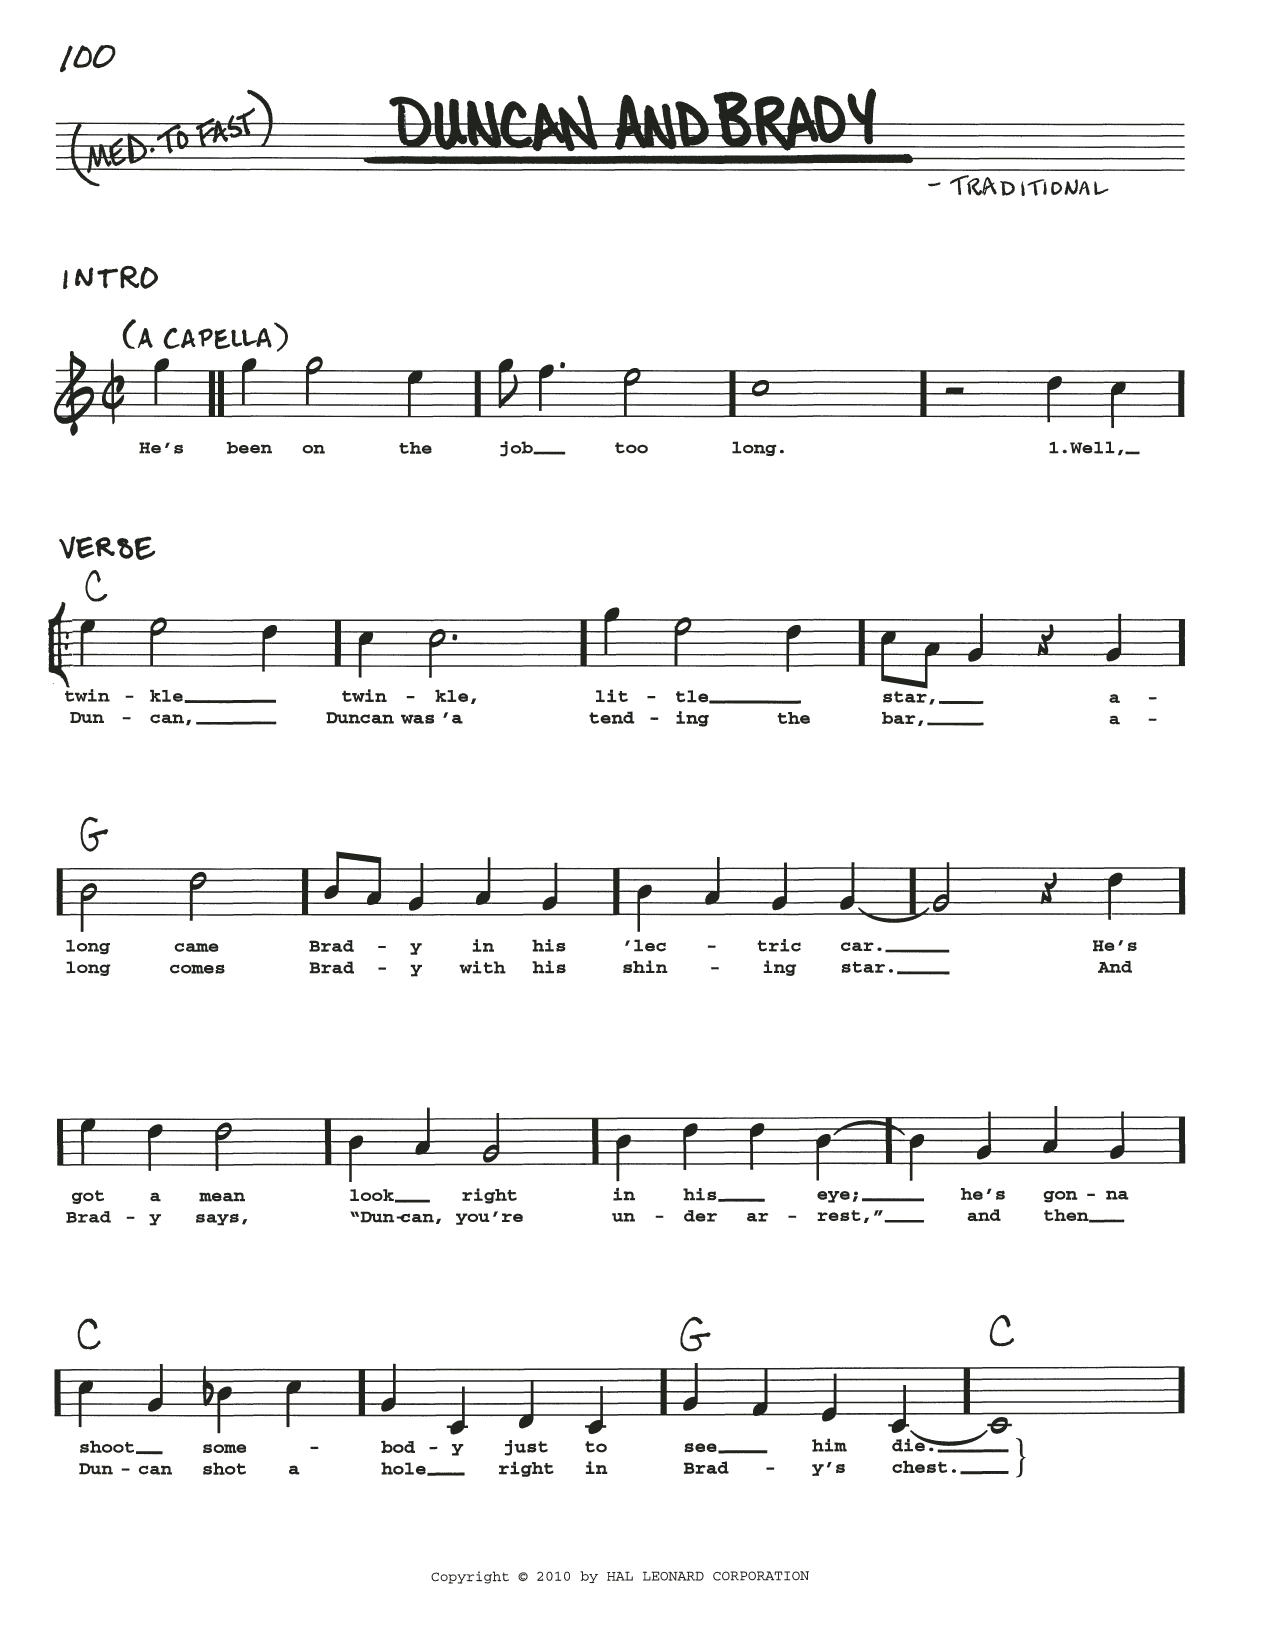 Download Traditional Duncan And Brady Sheet Music